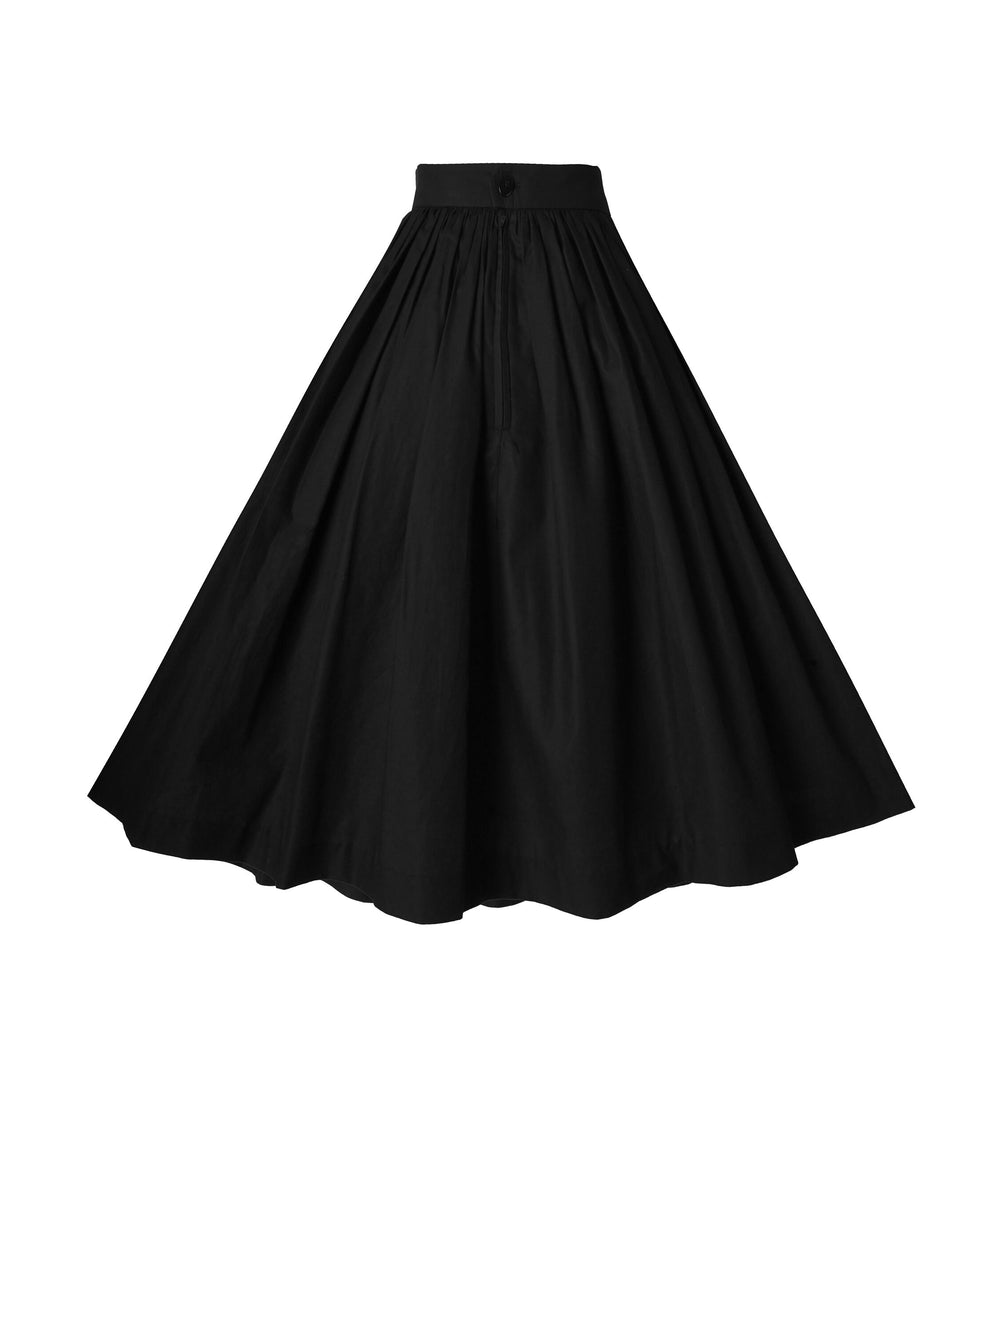 RTS - Size S - Lola Skirt in Raven Black Cotton